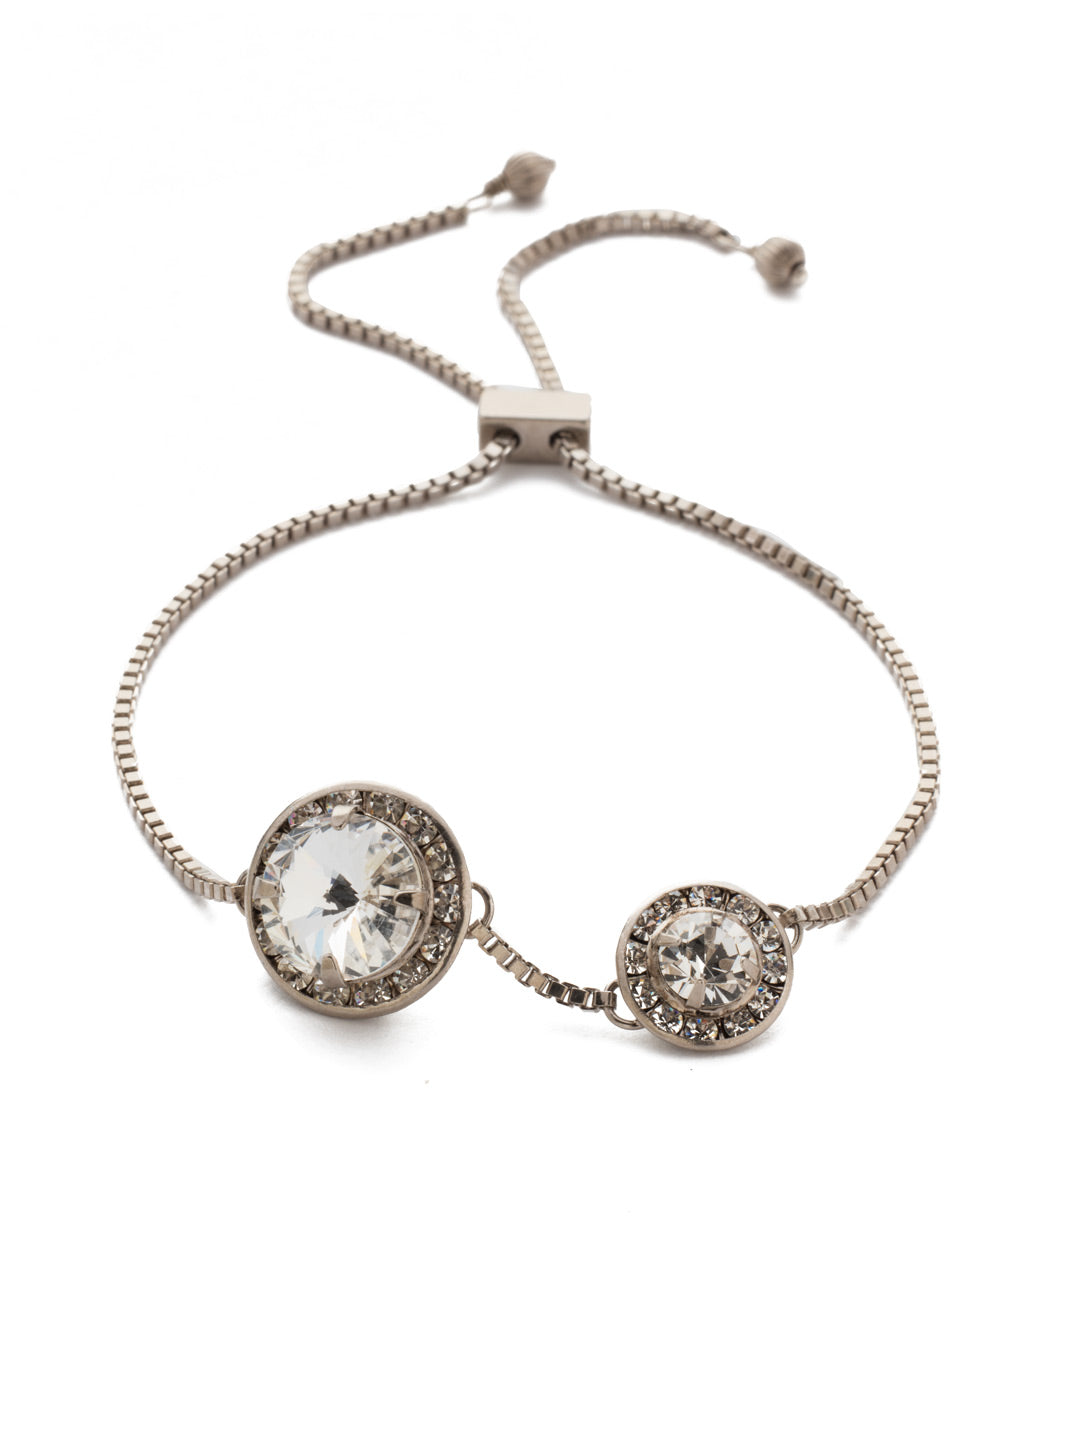 Dua Slider Bracelet - BEA25ASCRY - <p>Sparkling halo crystals connect on a delicate adjustable slider chain. From Sorrelli's Crystal collection in our Antique Silver-tone finish.</p>